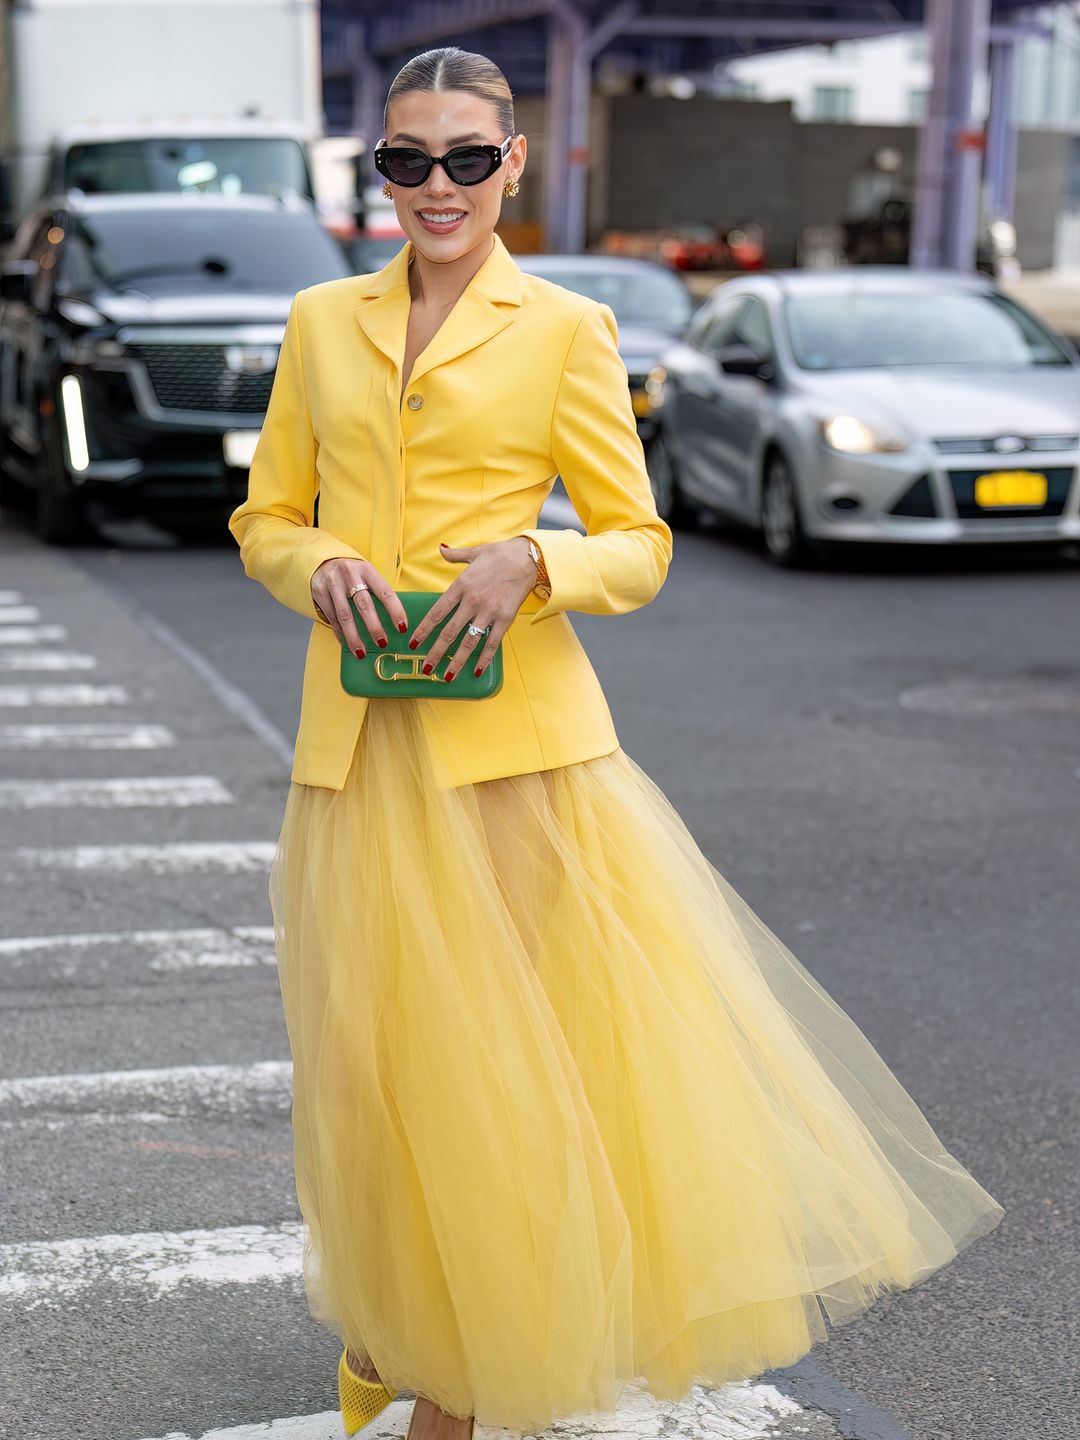 Michelle Salas is seen arriving to the Carolina Herrera fashion show in a yellow tulle skirt, yellow blazer and yellow heels